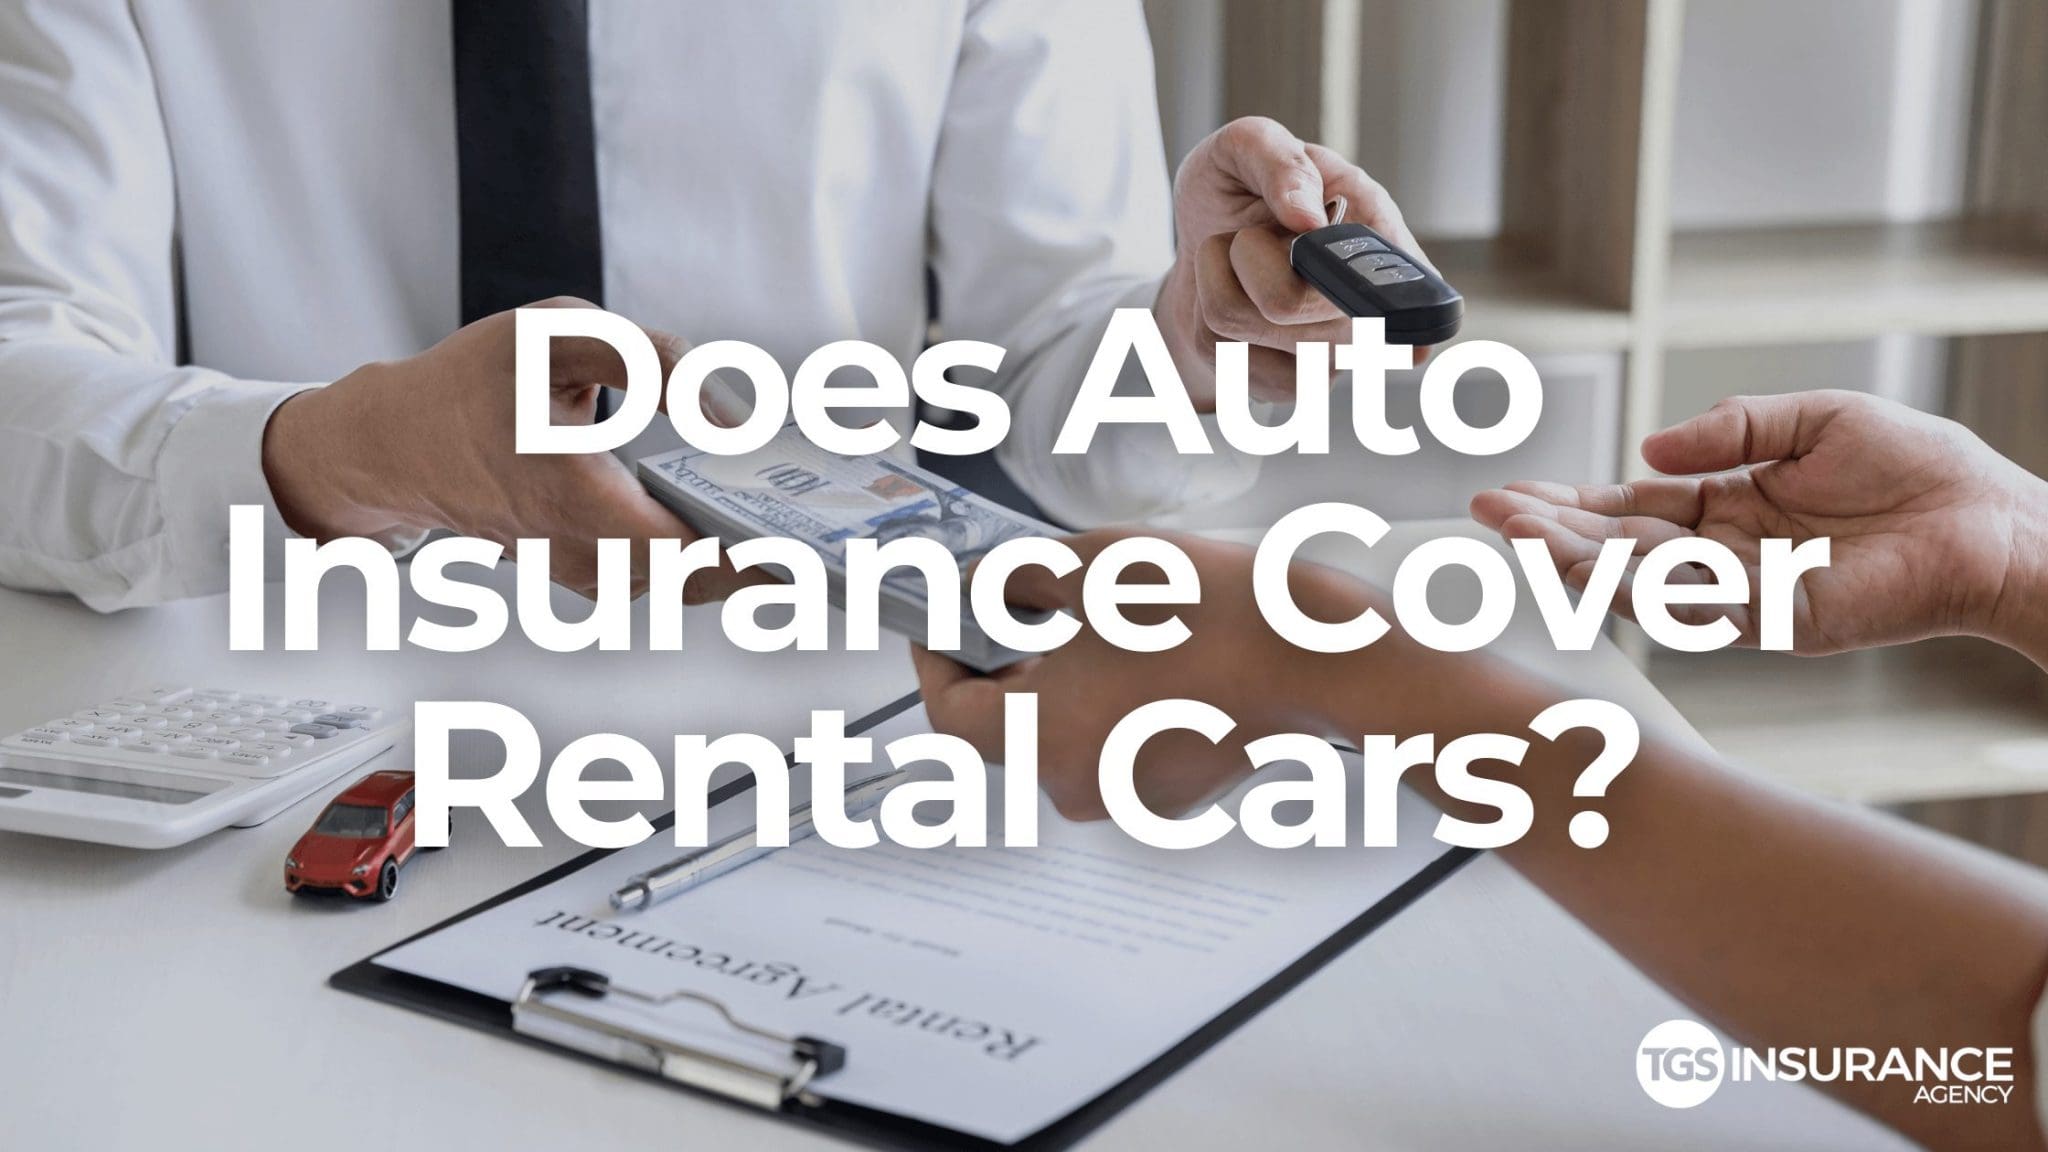 If your travel plans include a rental car, it's important to know beforehand if your auto insurance covers rental cars or if you need supplemental coverage.